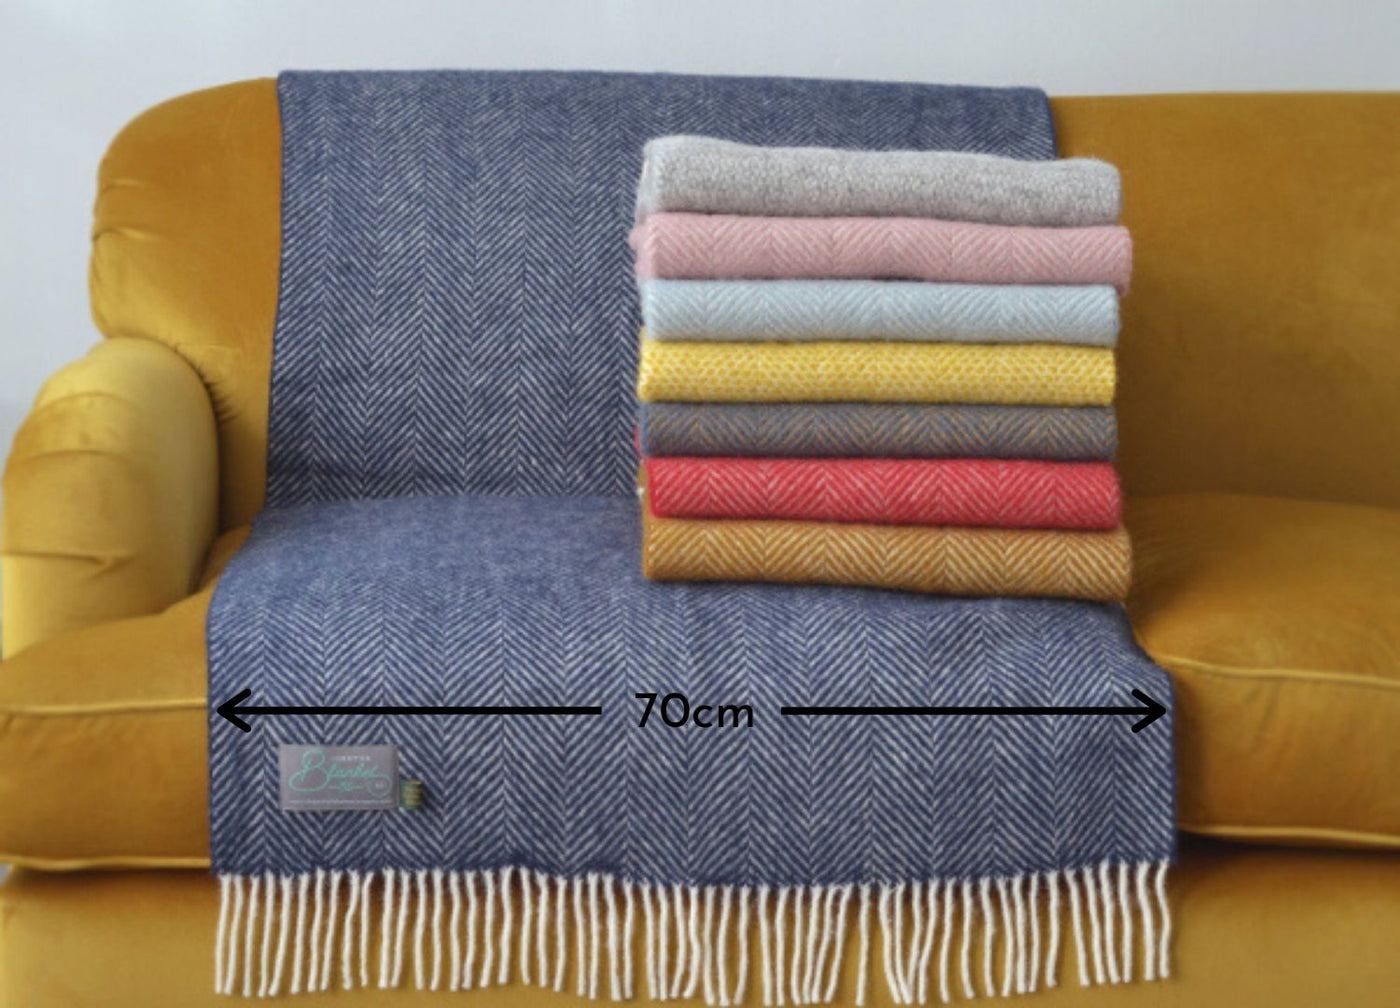 A stack of folded wool throws on a yellow sofa. A blue blanket measuring 70 centimeters in width is draped over the sofa